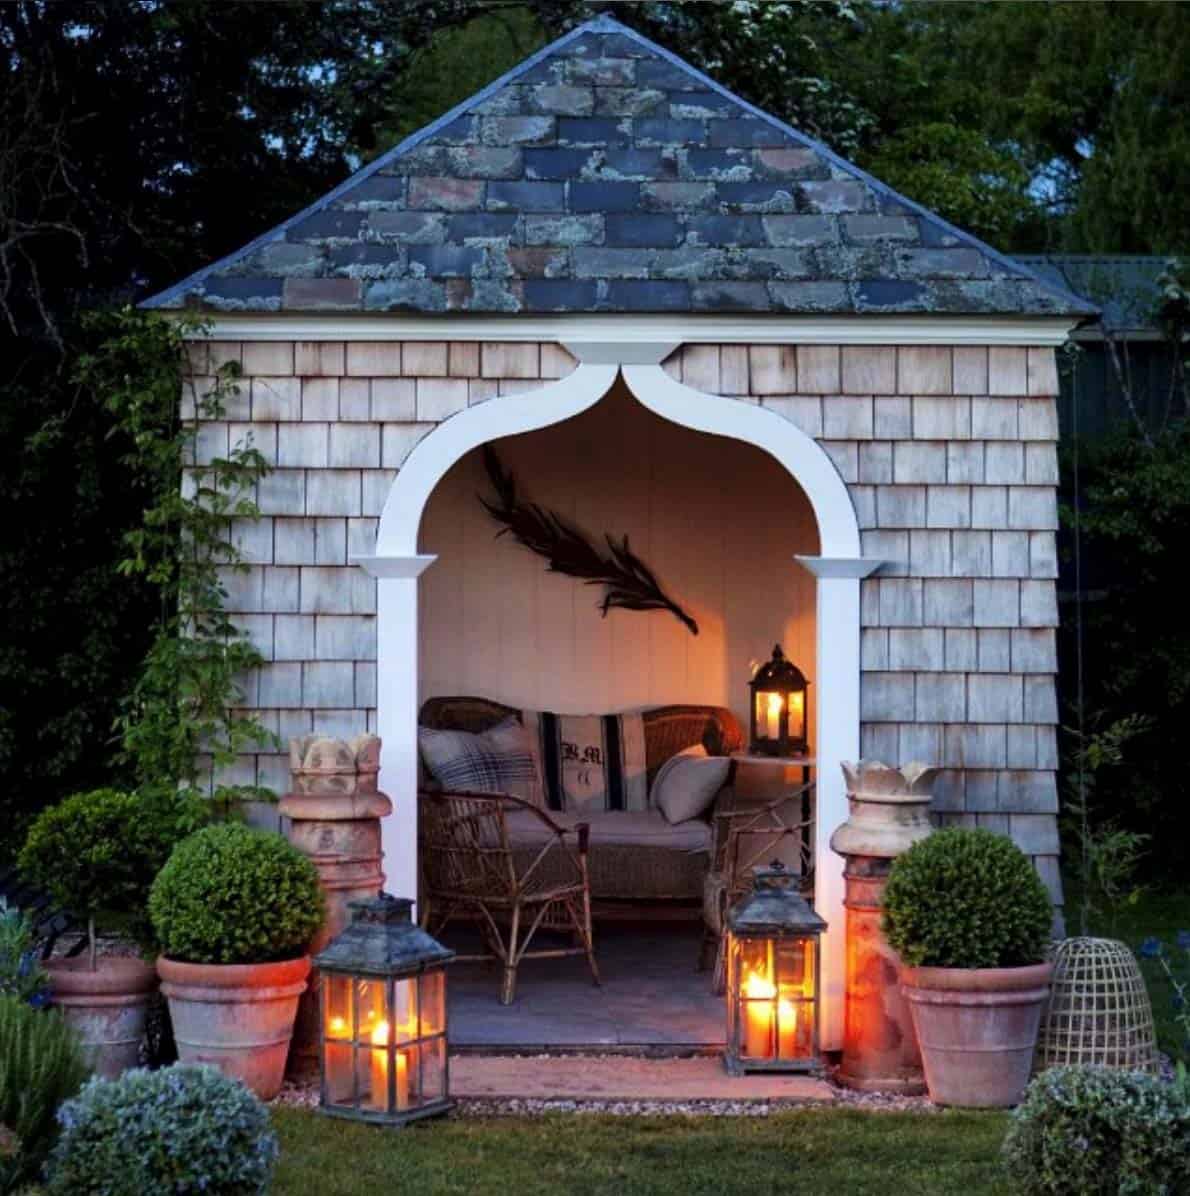 Magnificent architecture in this she shed backyard garden getaway with cedar shake shingles. Come explore She Shed Chic, Potting Shed & Backyard Inspiration.